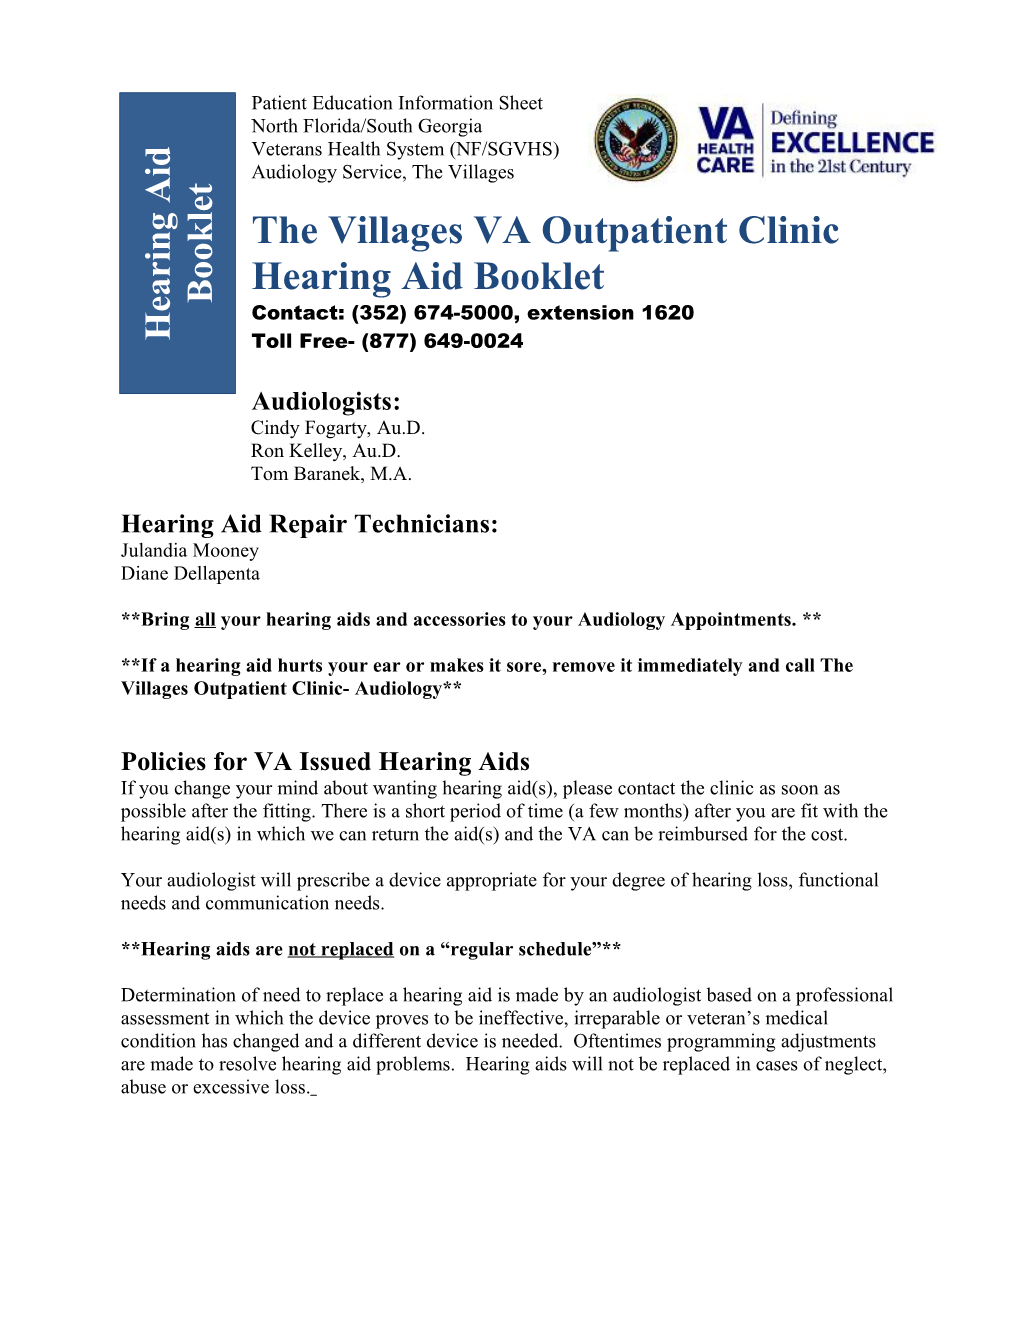 The Villages VA Outpatient Clinic Hearing Aid Booklet